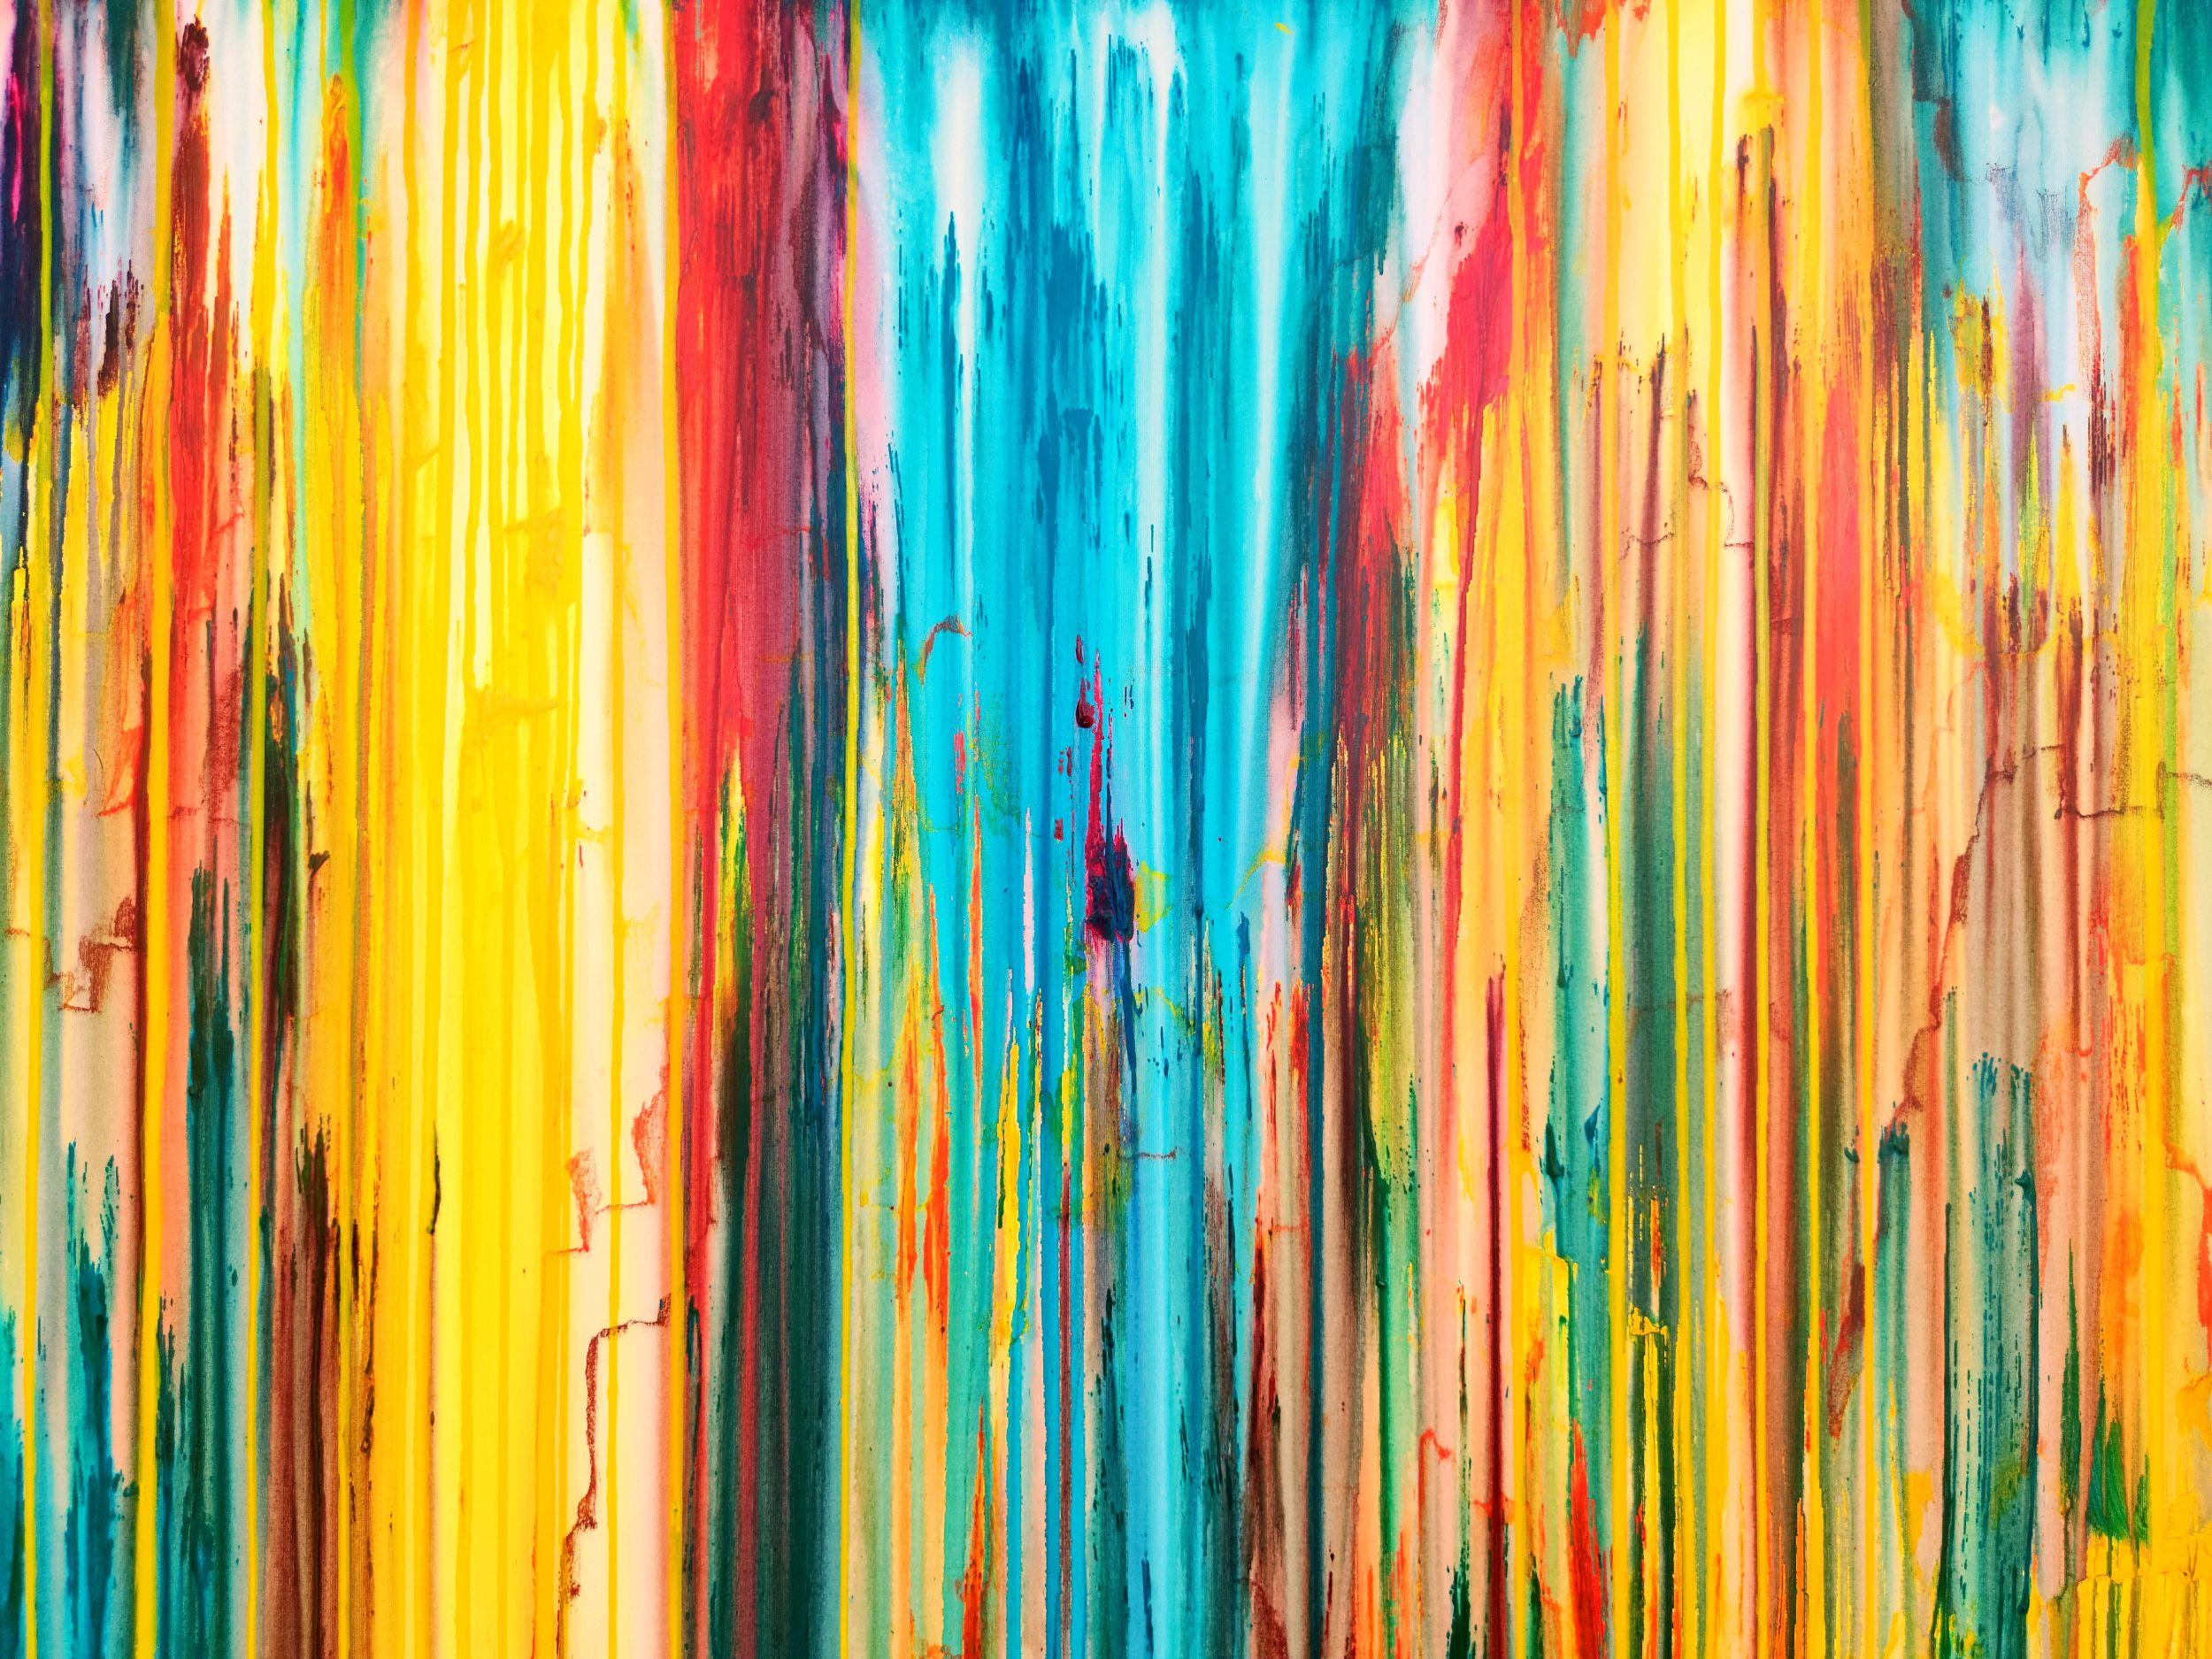 Carla Sá Fernandes Abstract Painting - The Emotional Creation #303, Painting, Acrylic on Canvas